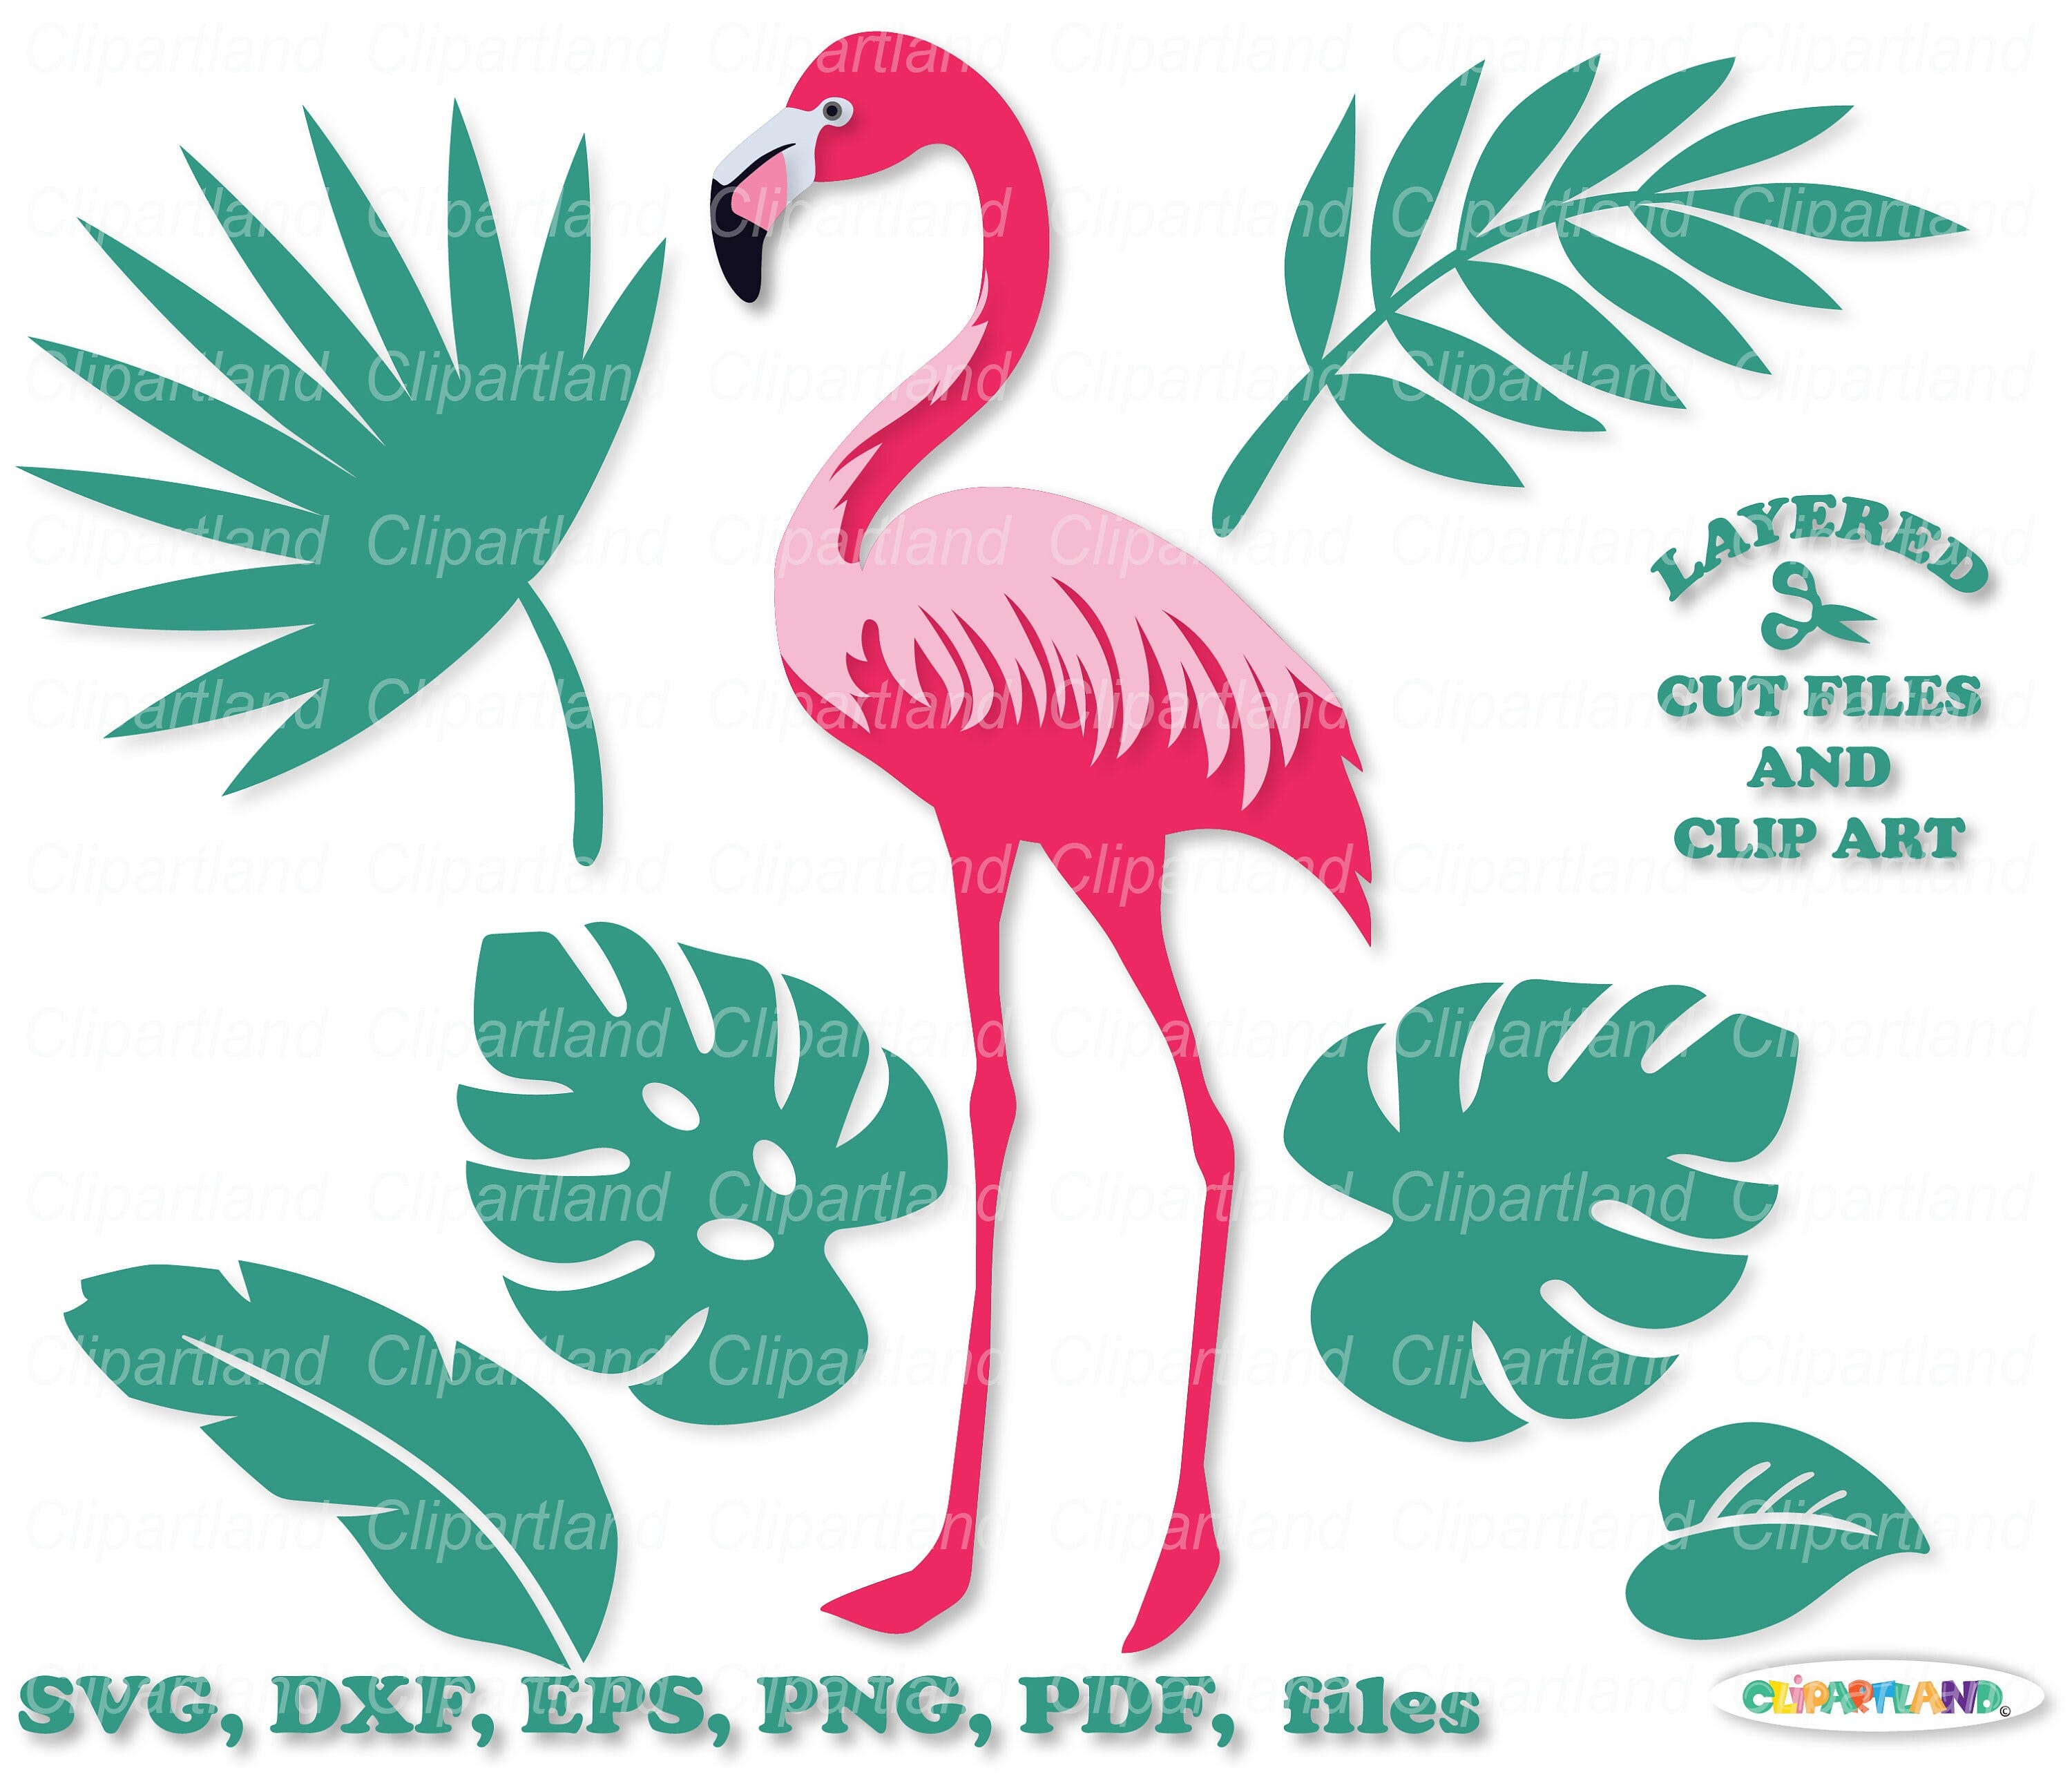 INSTANT Download. Cute flamingo svg cut files and clip art. Personal and commercial use. F_11.